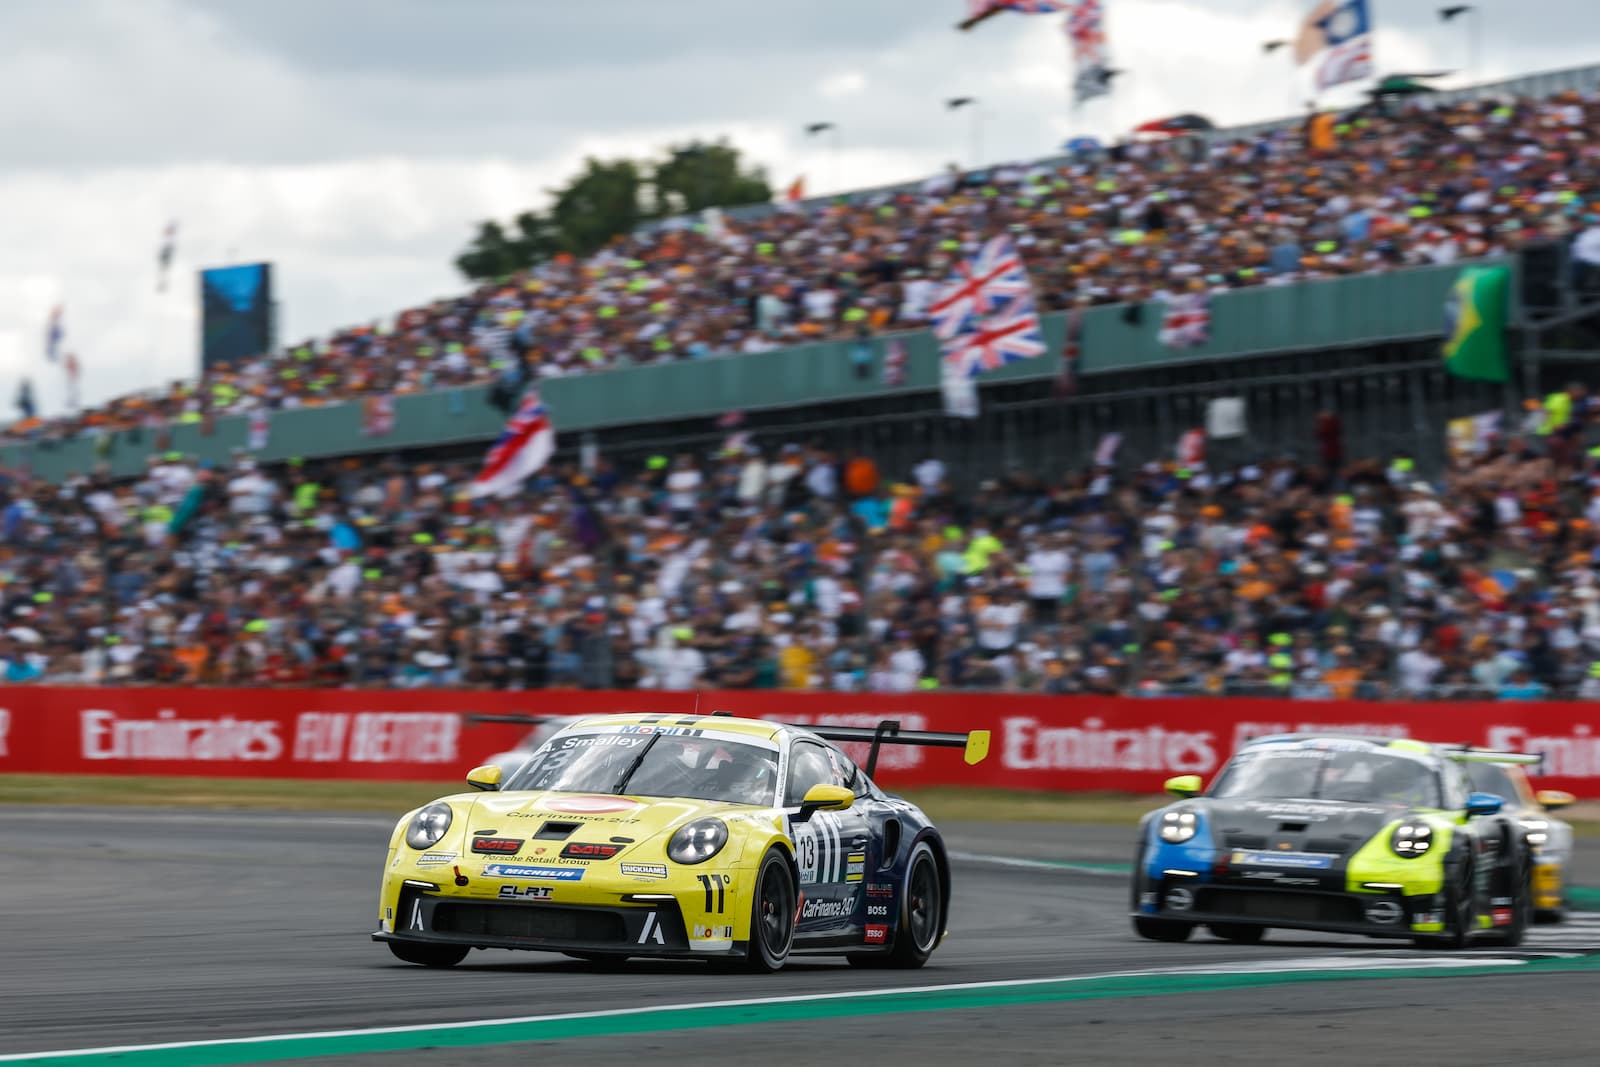 Smalley shines on Porsche Supercup debut in front of capacity Silverstone crowd